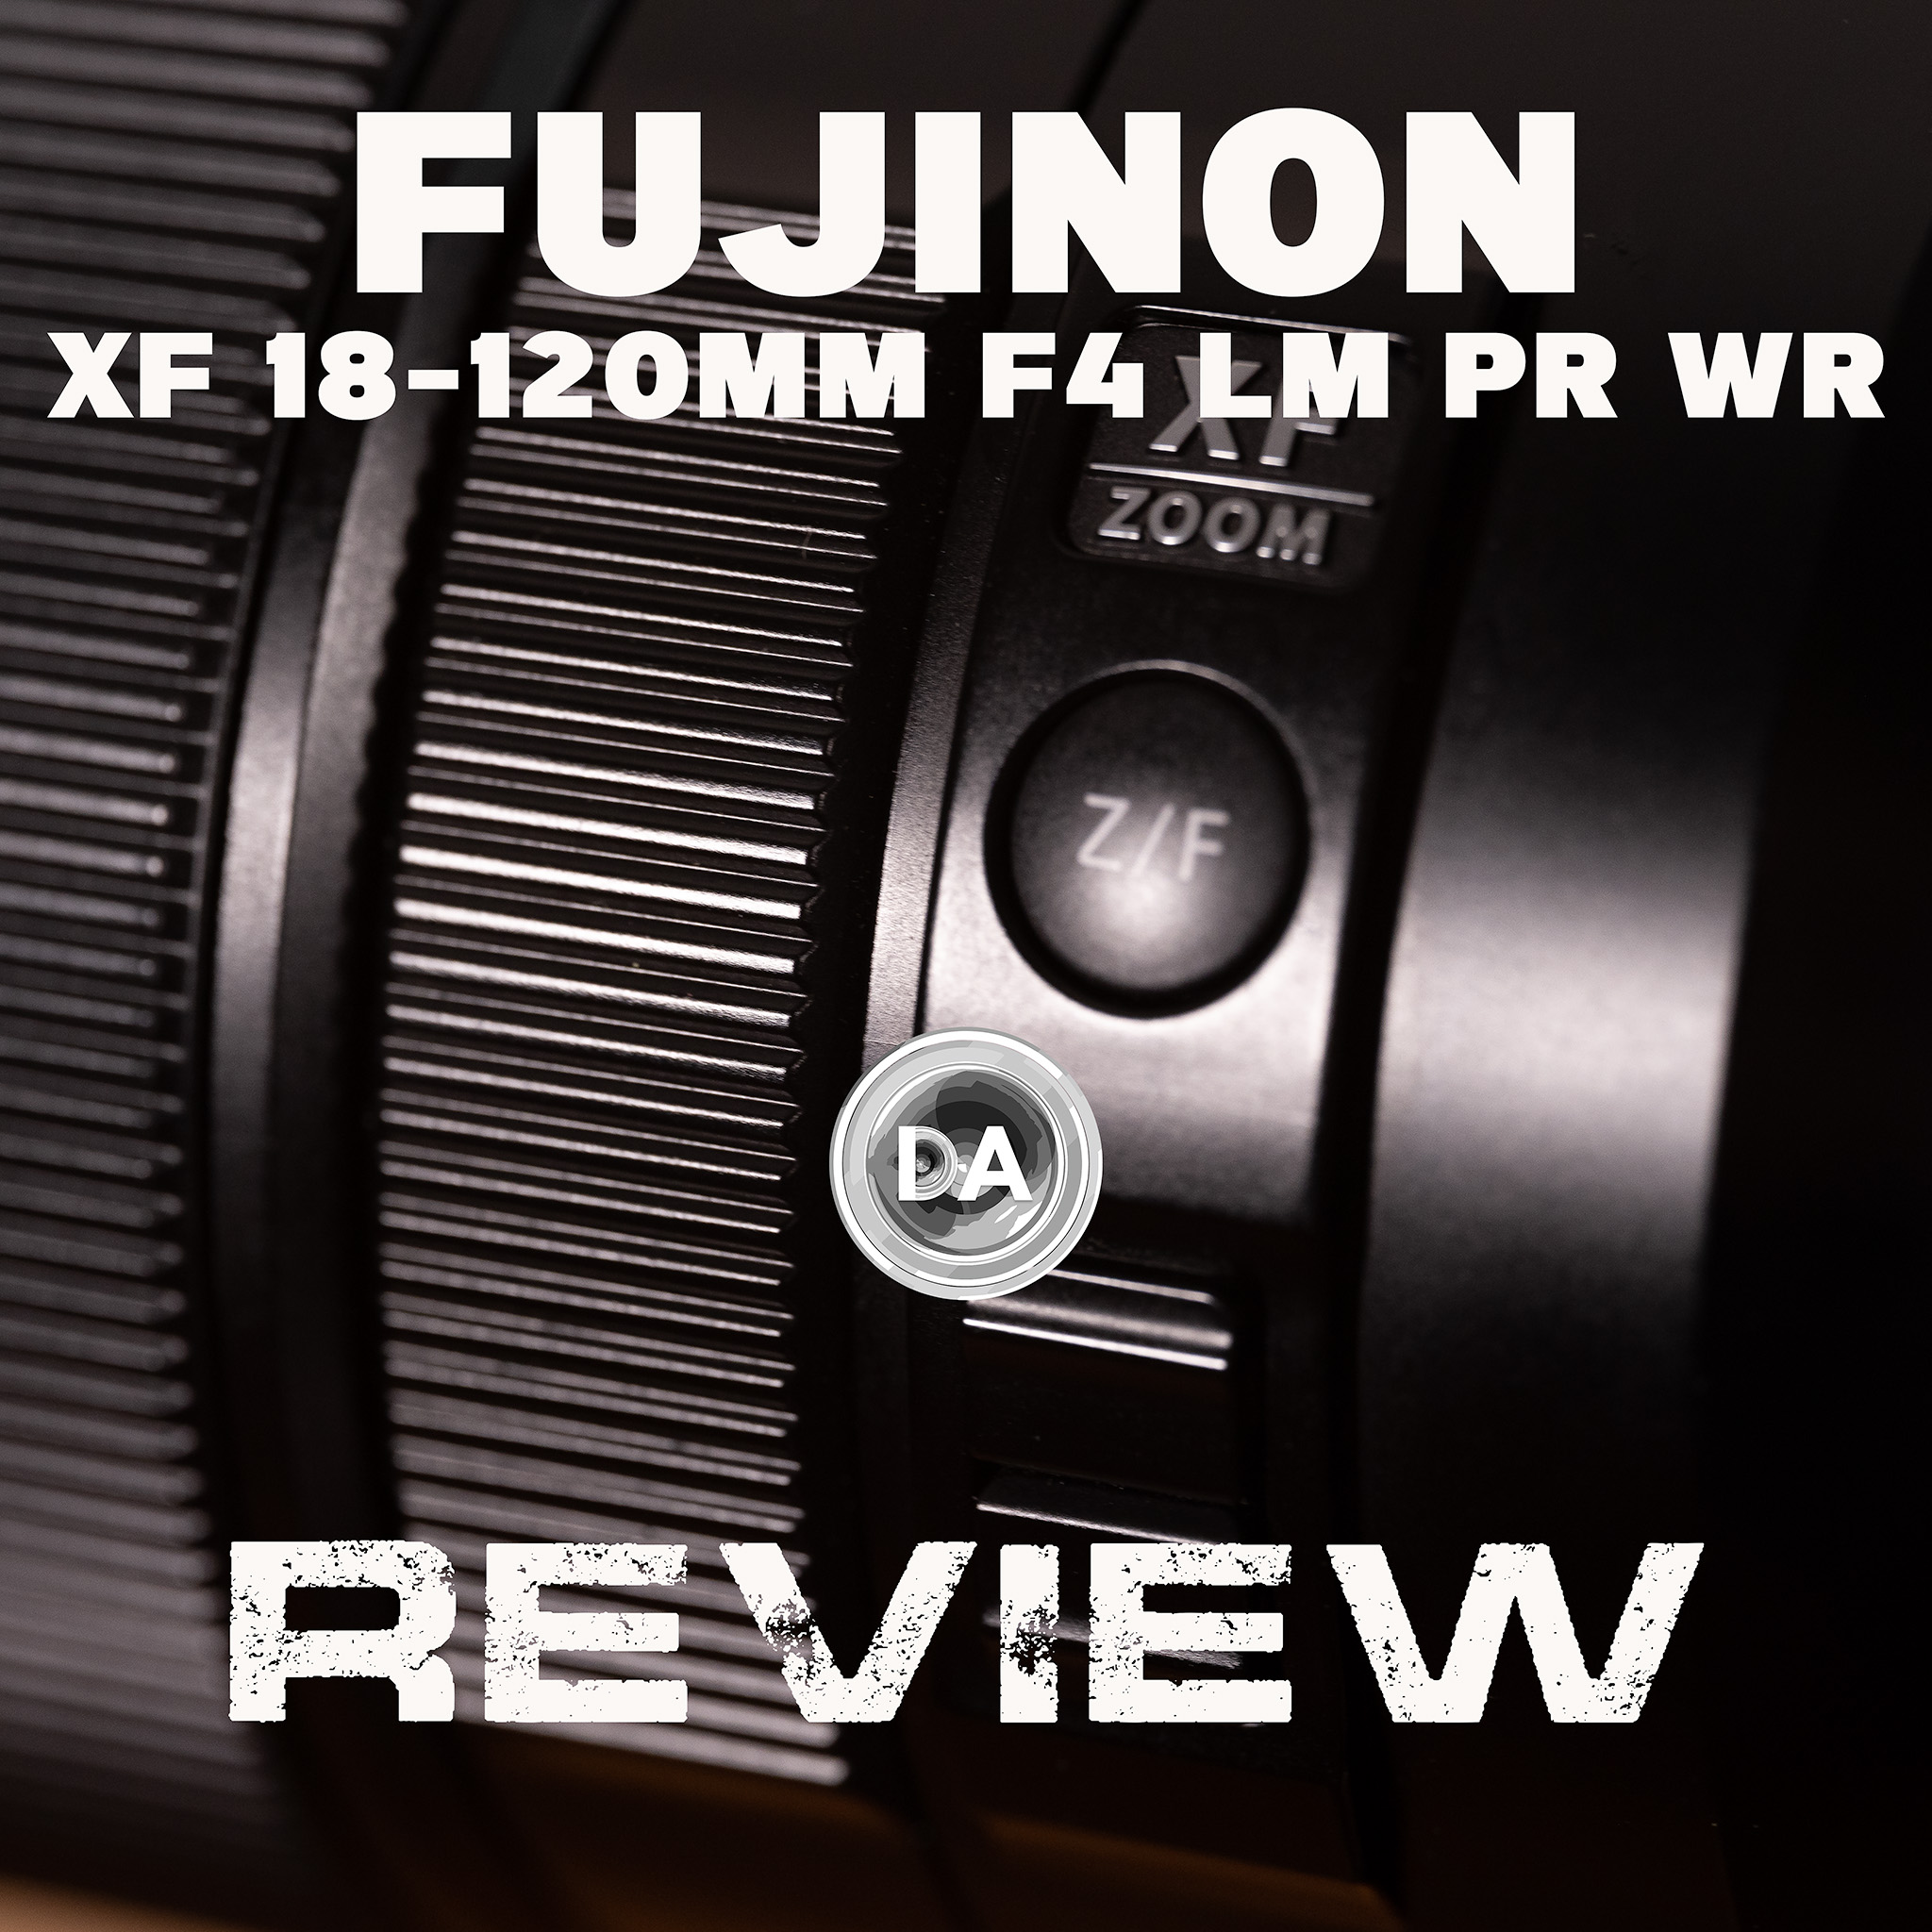 Fujinon XF 18-120mm F4 LM WR PZ Review | Why Don't People Love It?